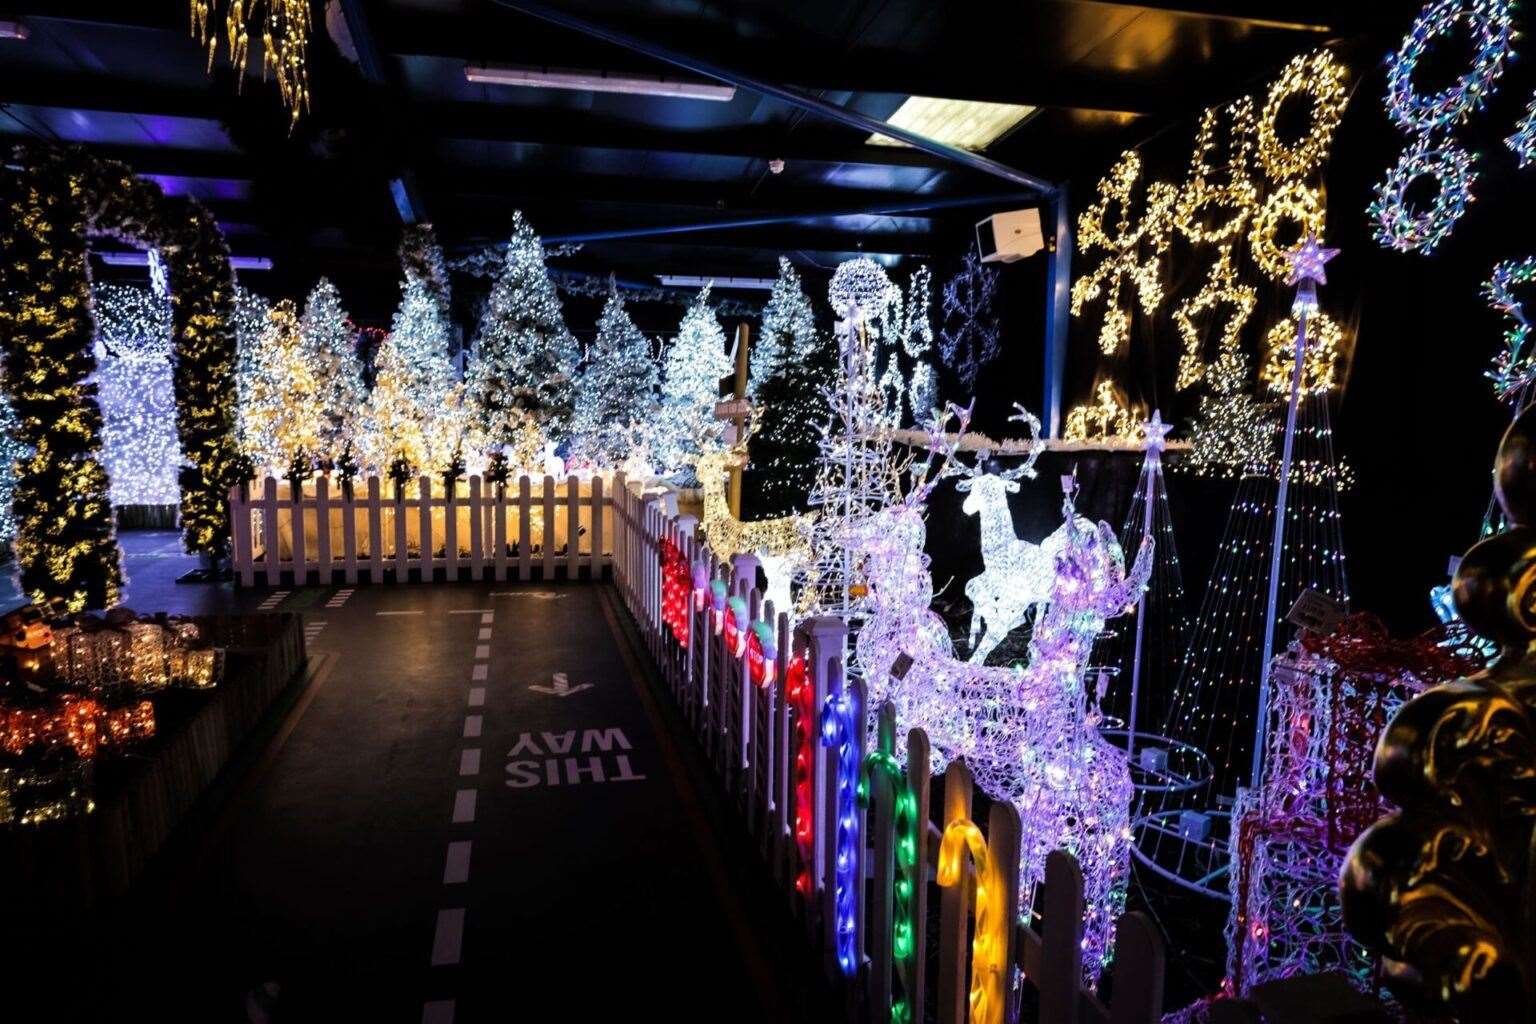 The showroom at Time Christmas has more than 2000 lights and items plugged in at once. Picture: Time Christmas